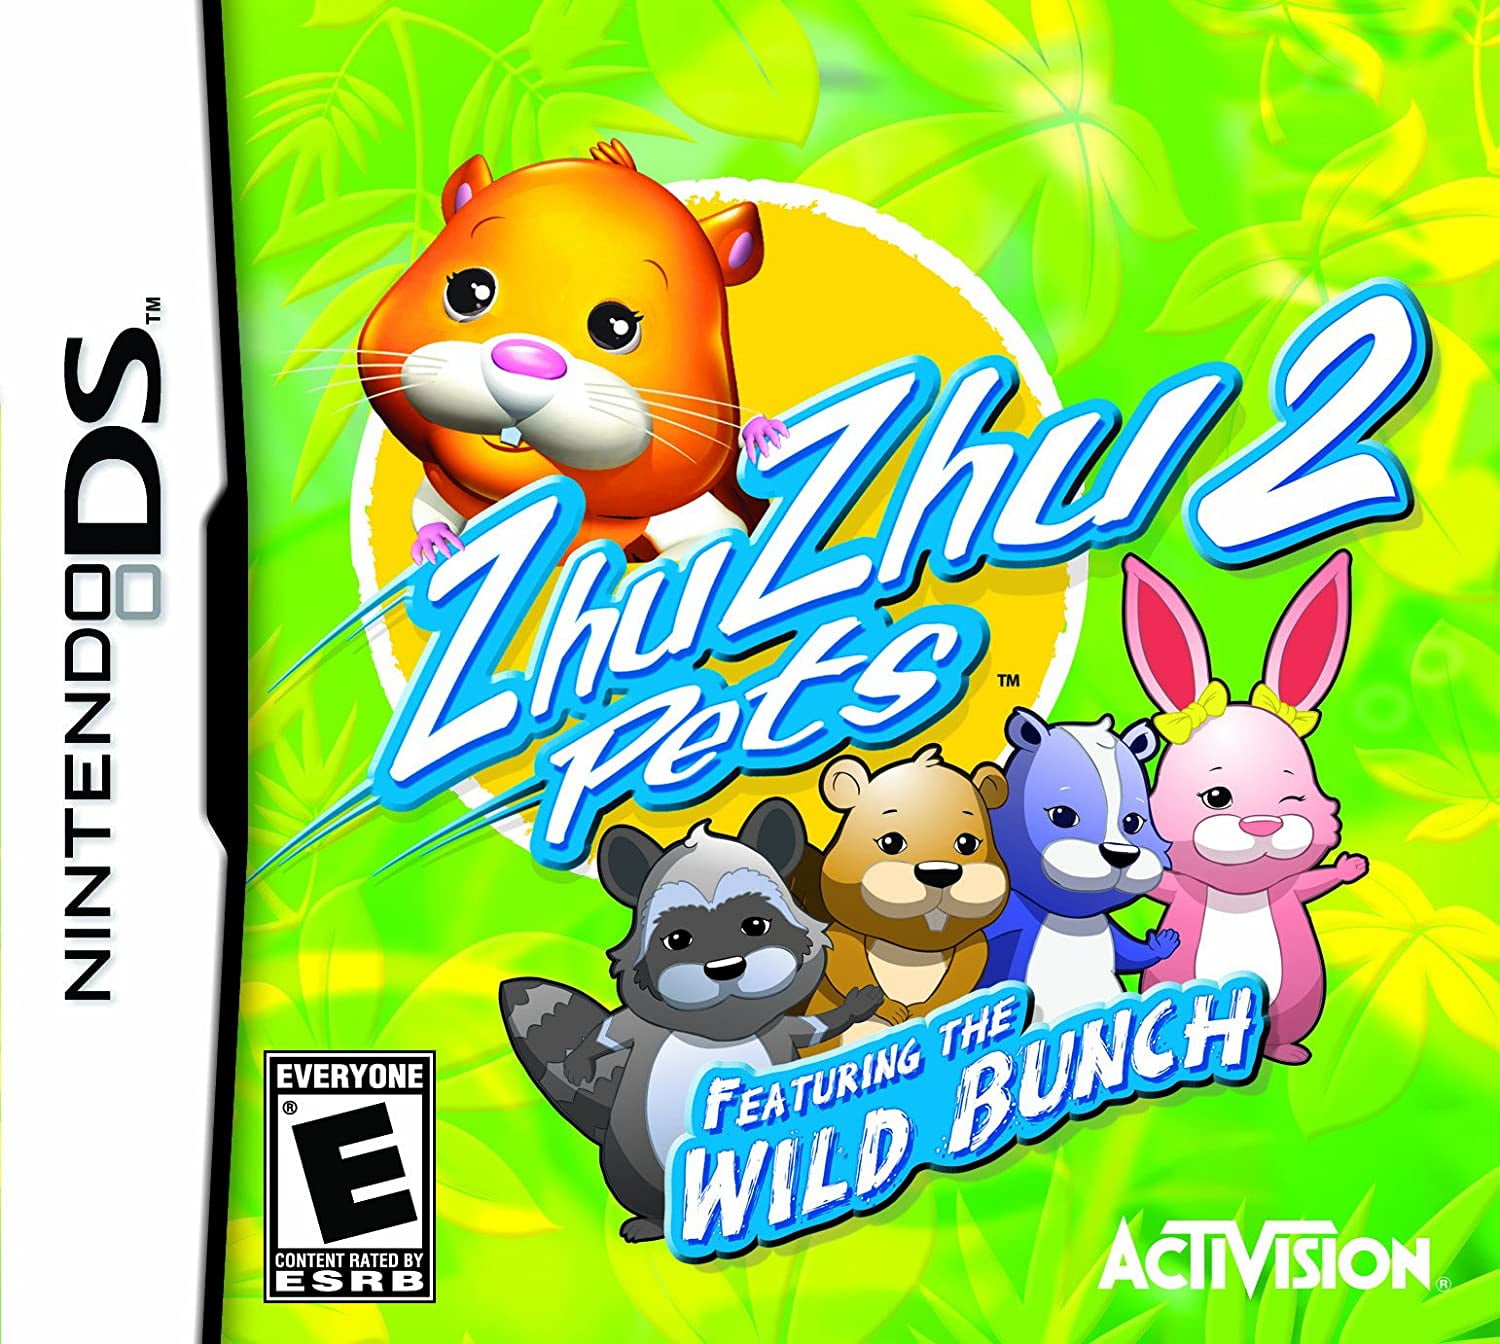 ZHU ZHU FEATURING THE WILD BUNCH NDS - Keep an eye out Rocco, Stinker & Nutters in this DS game - Walmart.com